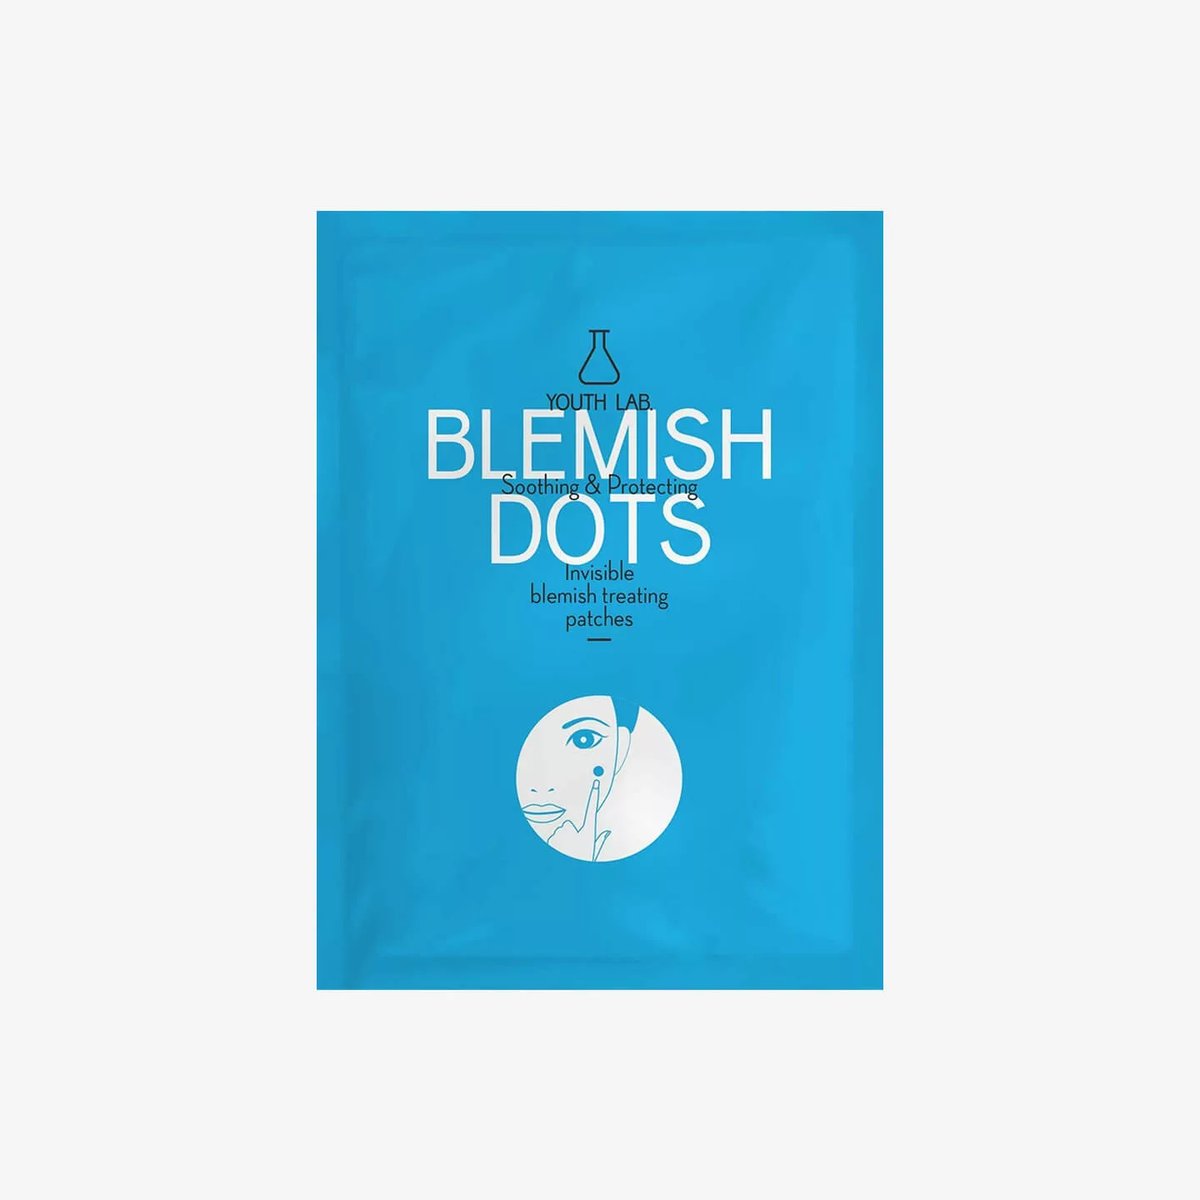 YOUTH-LAB-Blemish-Dots-For-Blemish-Prone-Skin-.1